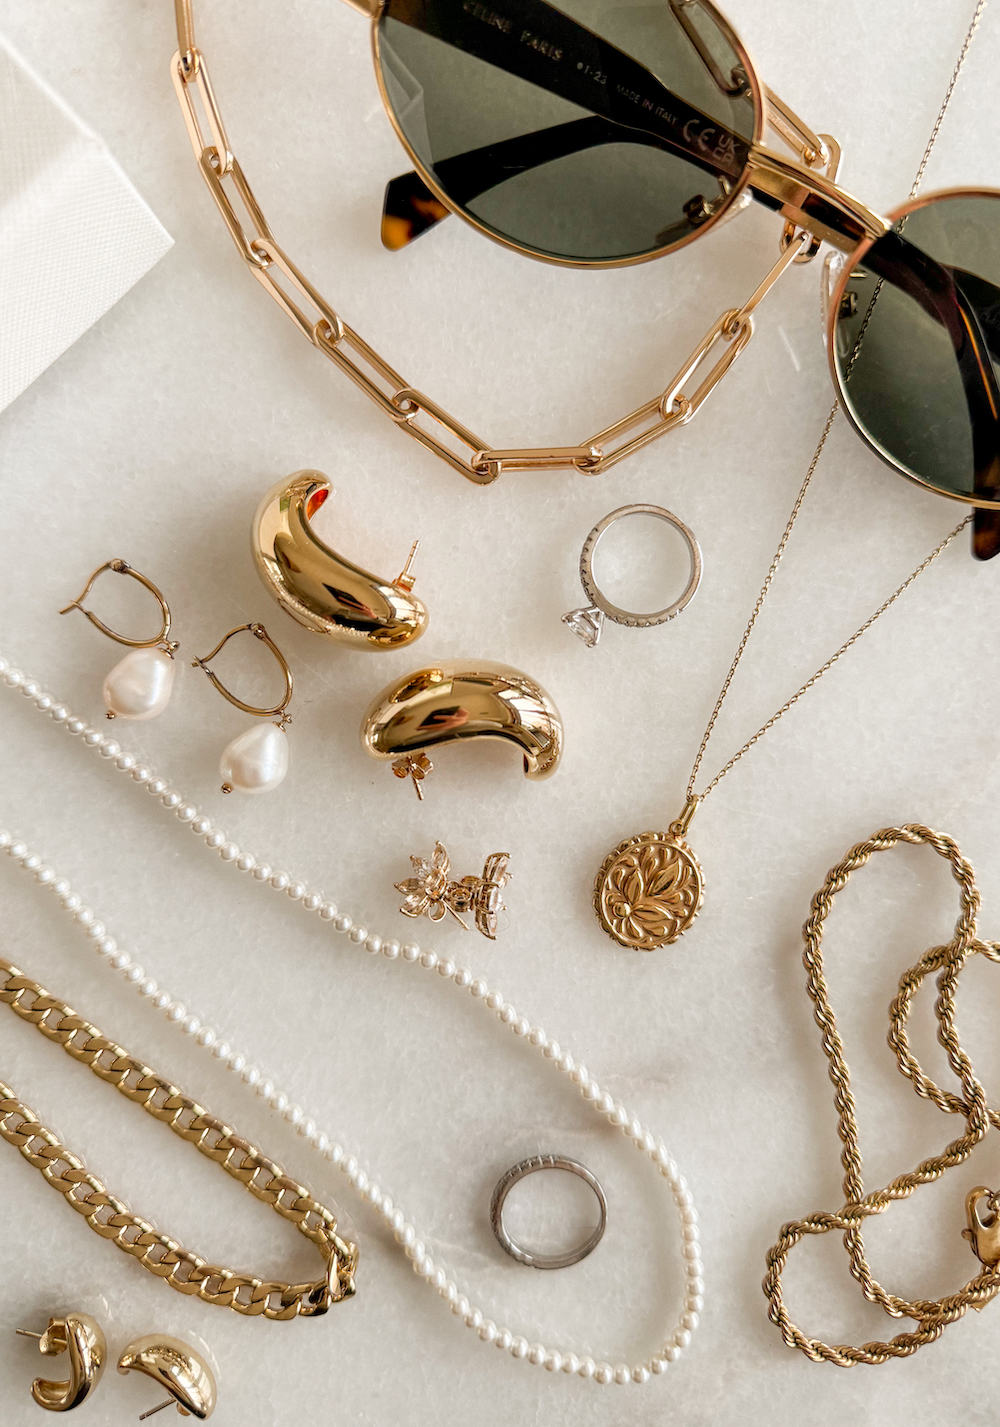 image of a minimal collection of jewelry on a marble board including gold earrings, chain necklaces, pearl earrings, and a pearl necklace